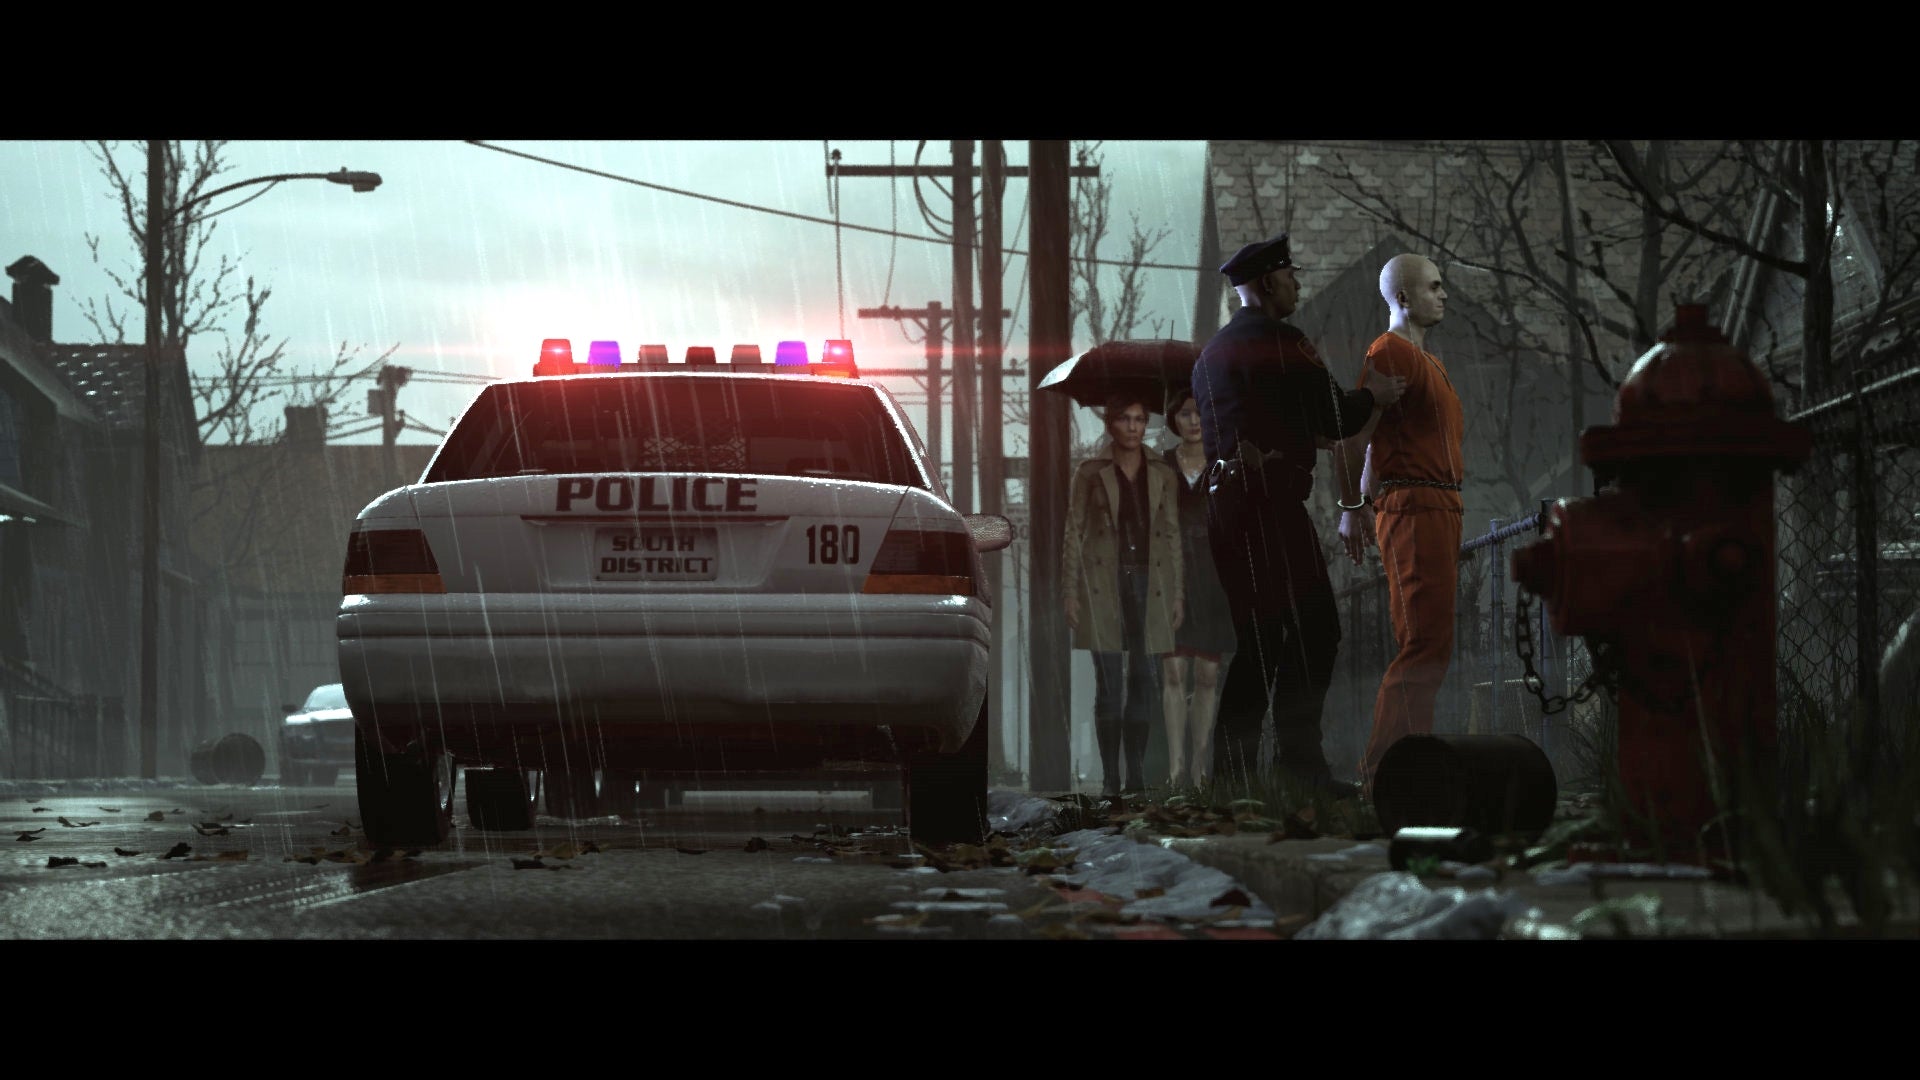 Rainy street scene with police car, officers and a handcuffed person.